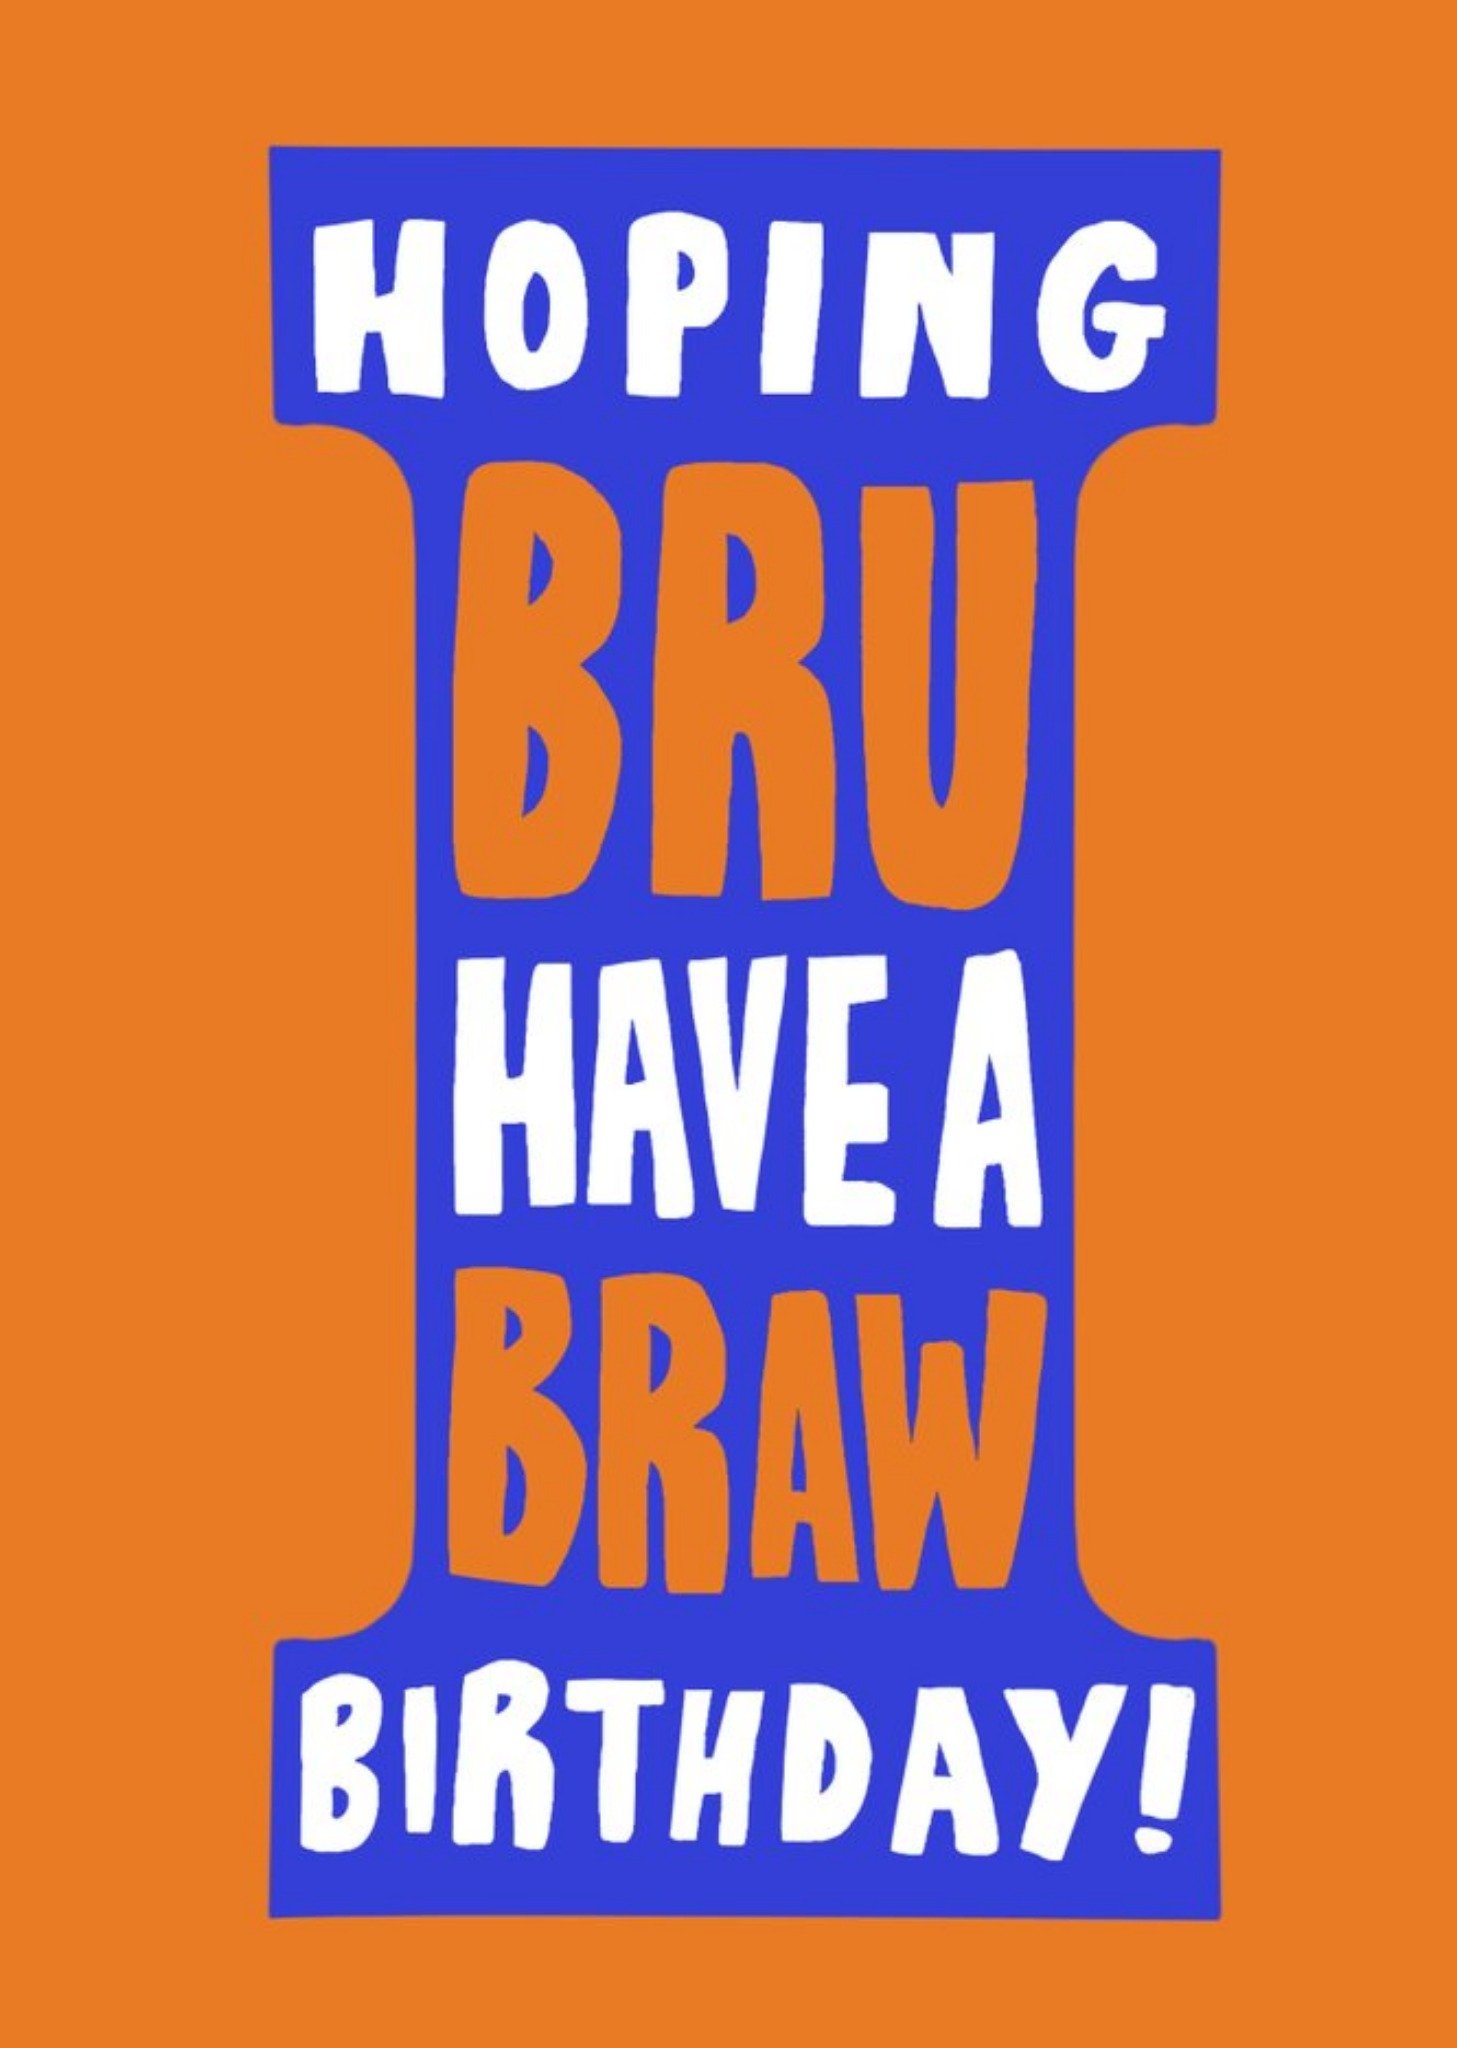 Moonpig Sketchy Characters Bright Graphic I Hoping Bru Have A Braw Birthday Card, Large